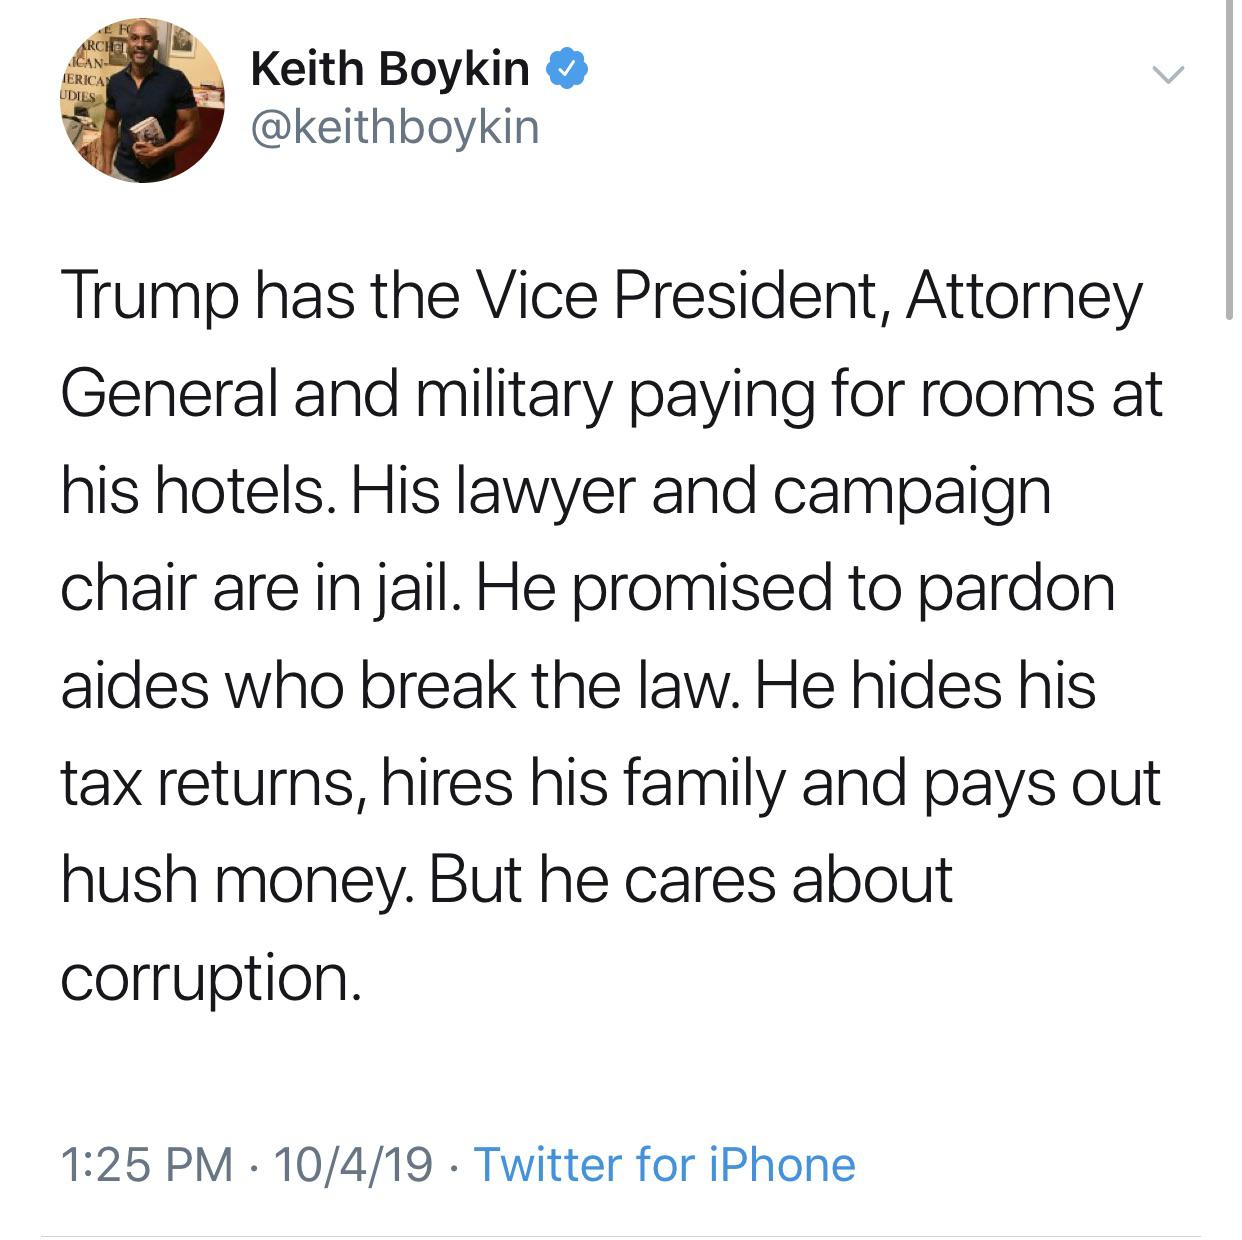 political political-memes political text: Keith Boykin @keithboykin Trump has the Vice President, Attorney General and military paying for rooms at his hotels. His lawyer and campaign chair are in jail. He promised to pardon aides who break the law. He hides his tax returns, hires his family and pays out hush money. But he cares about corruption. 1:25 PM • 10/4/19 • Twitter for iPhone 